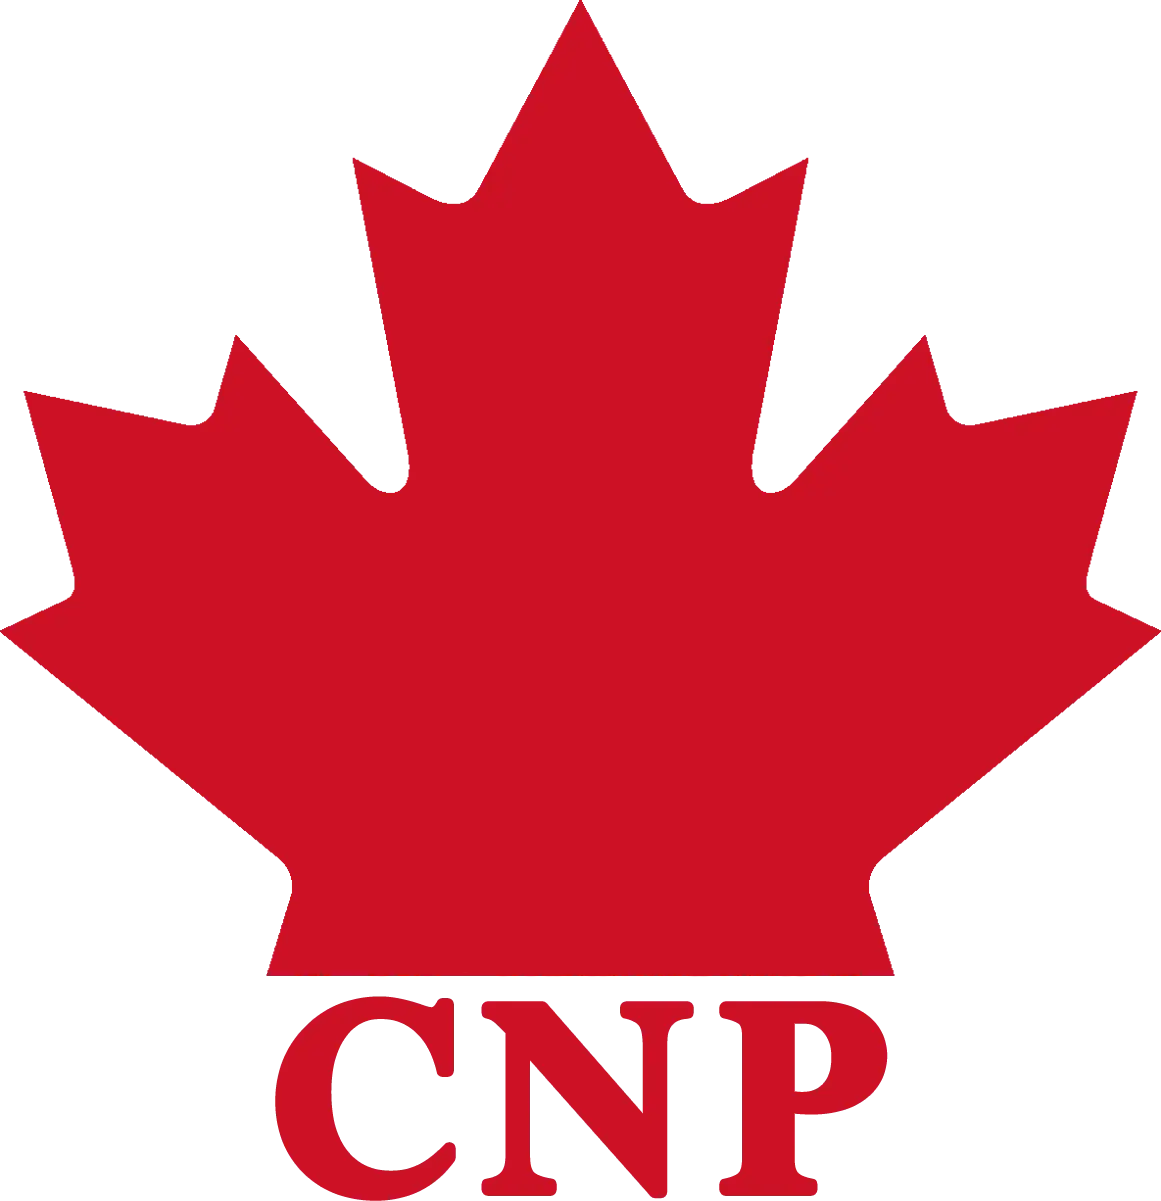 A red logo of a maple leaf above the letters "CNP".